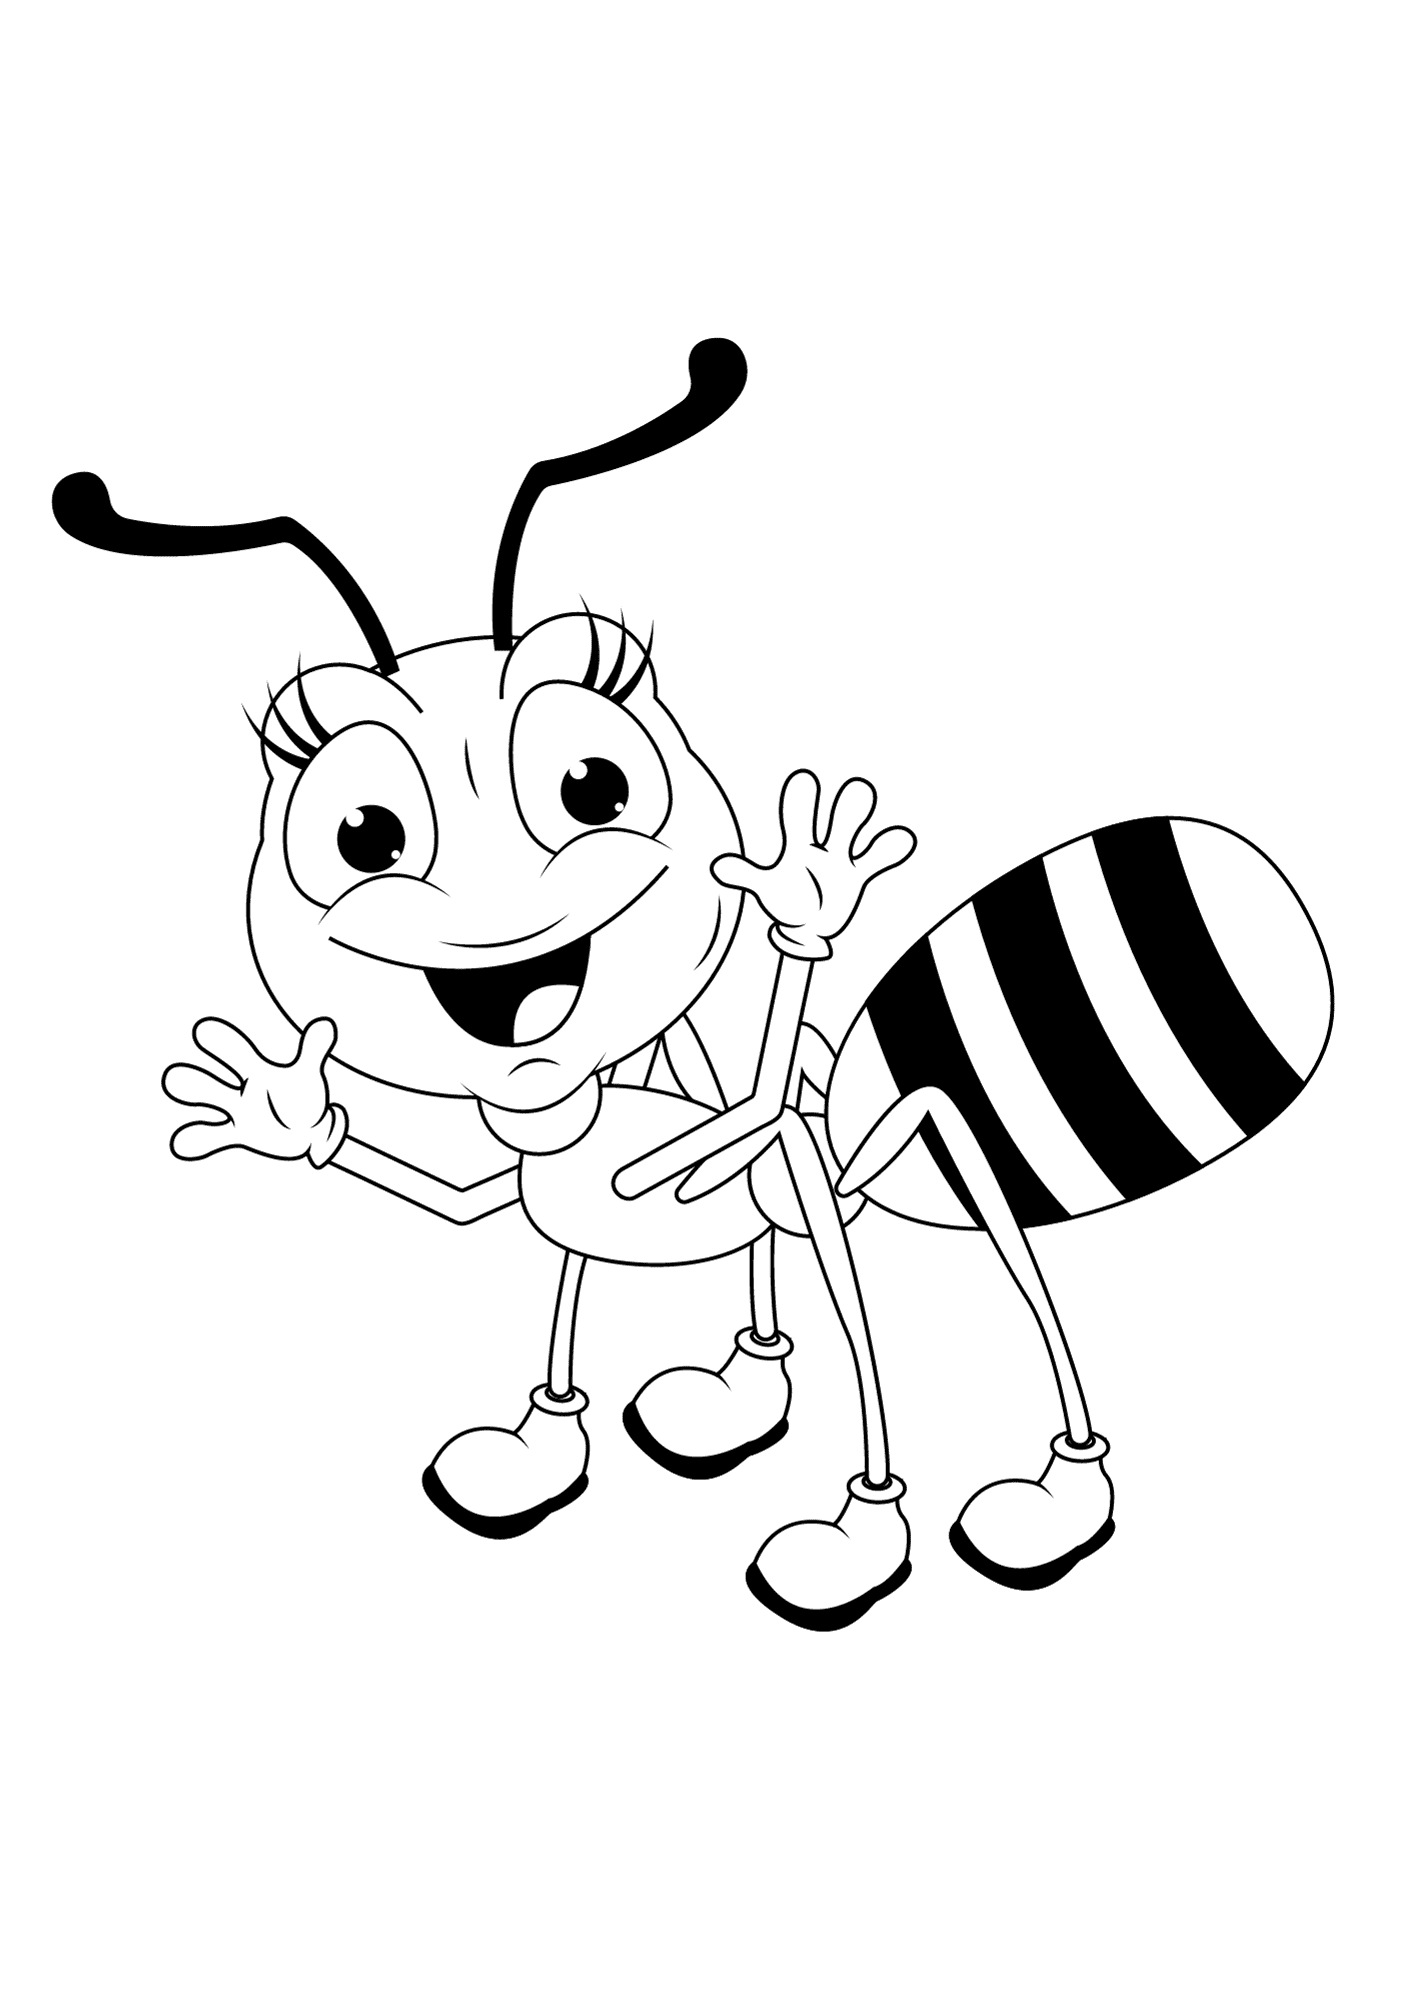 Ant Man Coloring Pages To Print